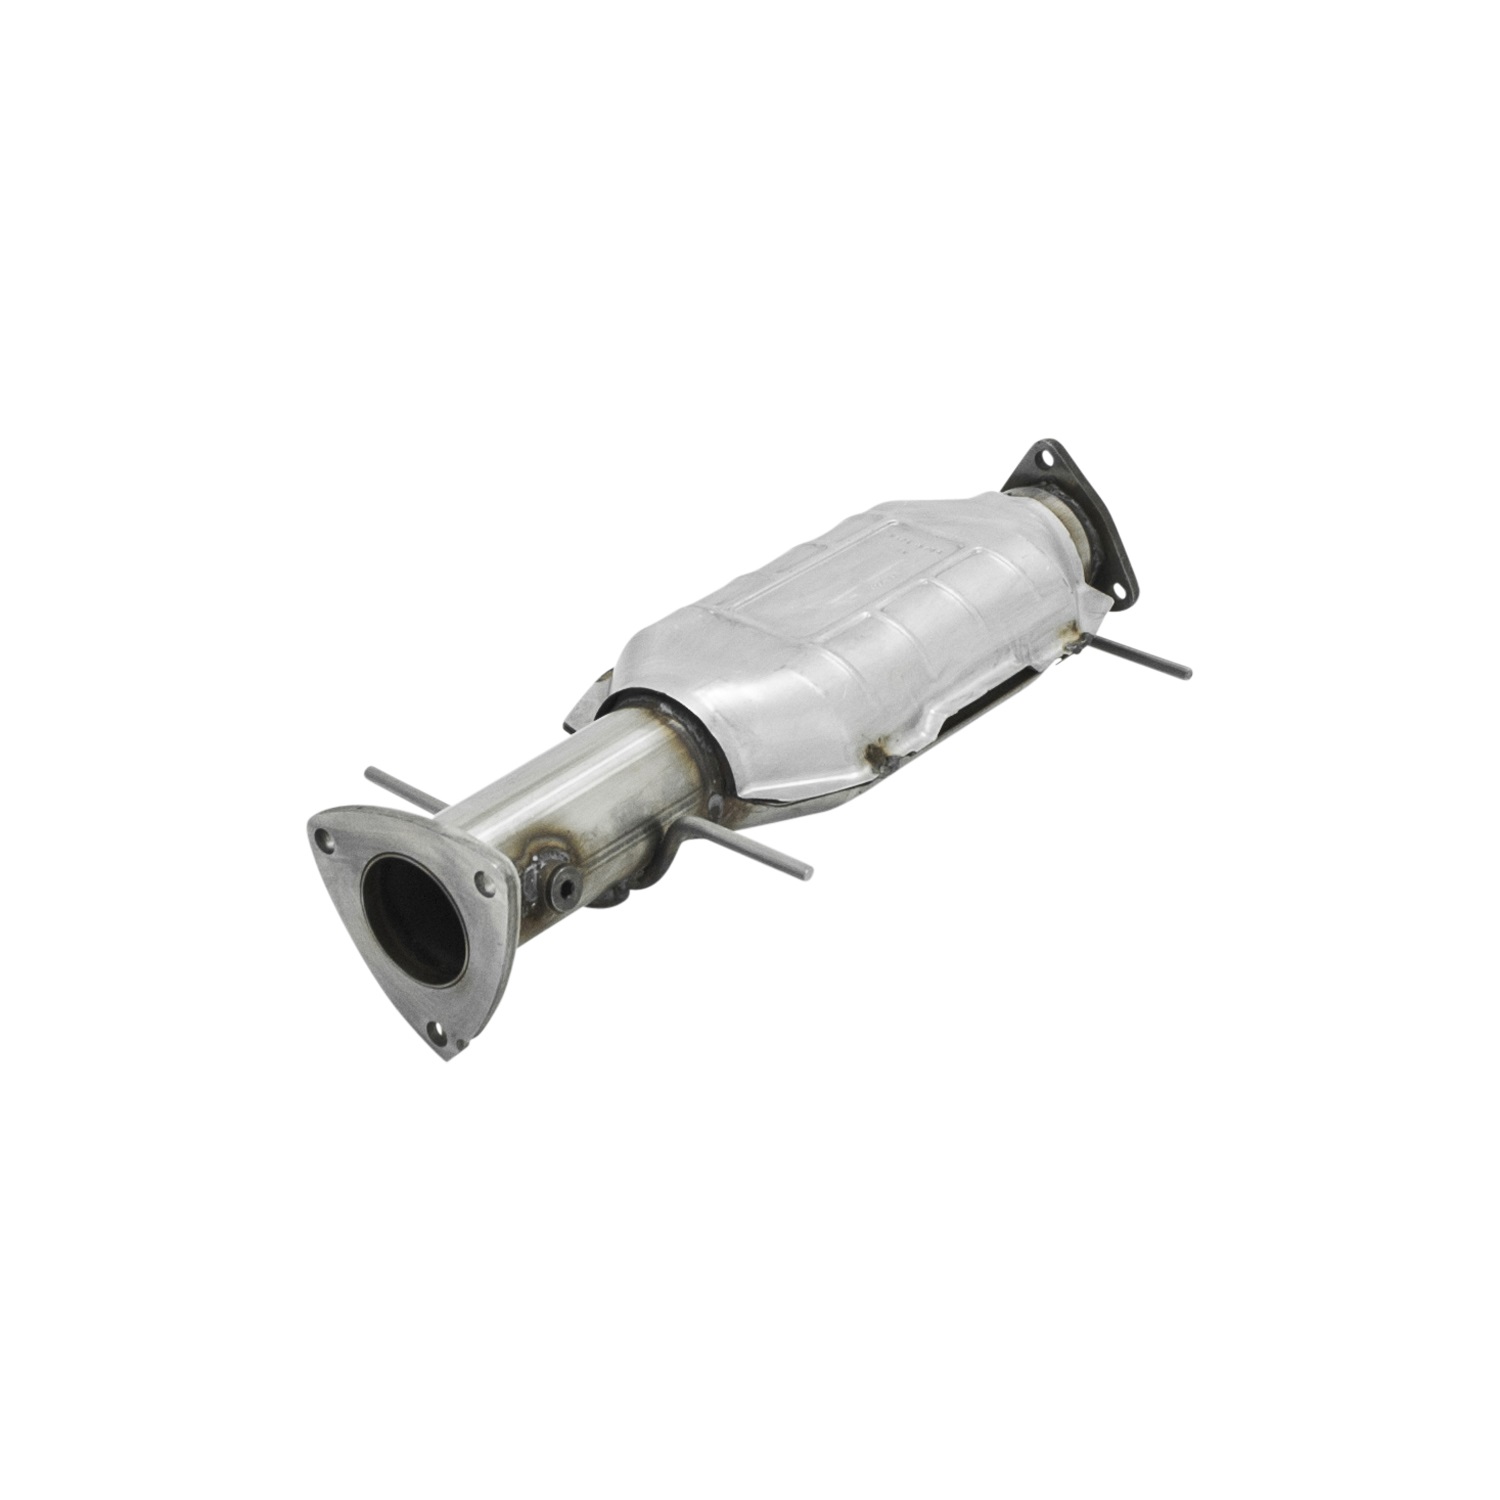 Flowmaster Flowmaster 2010017 Direct Fit Catalytic Converter Fits 98-99 S10 Pickup Sonoma